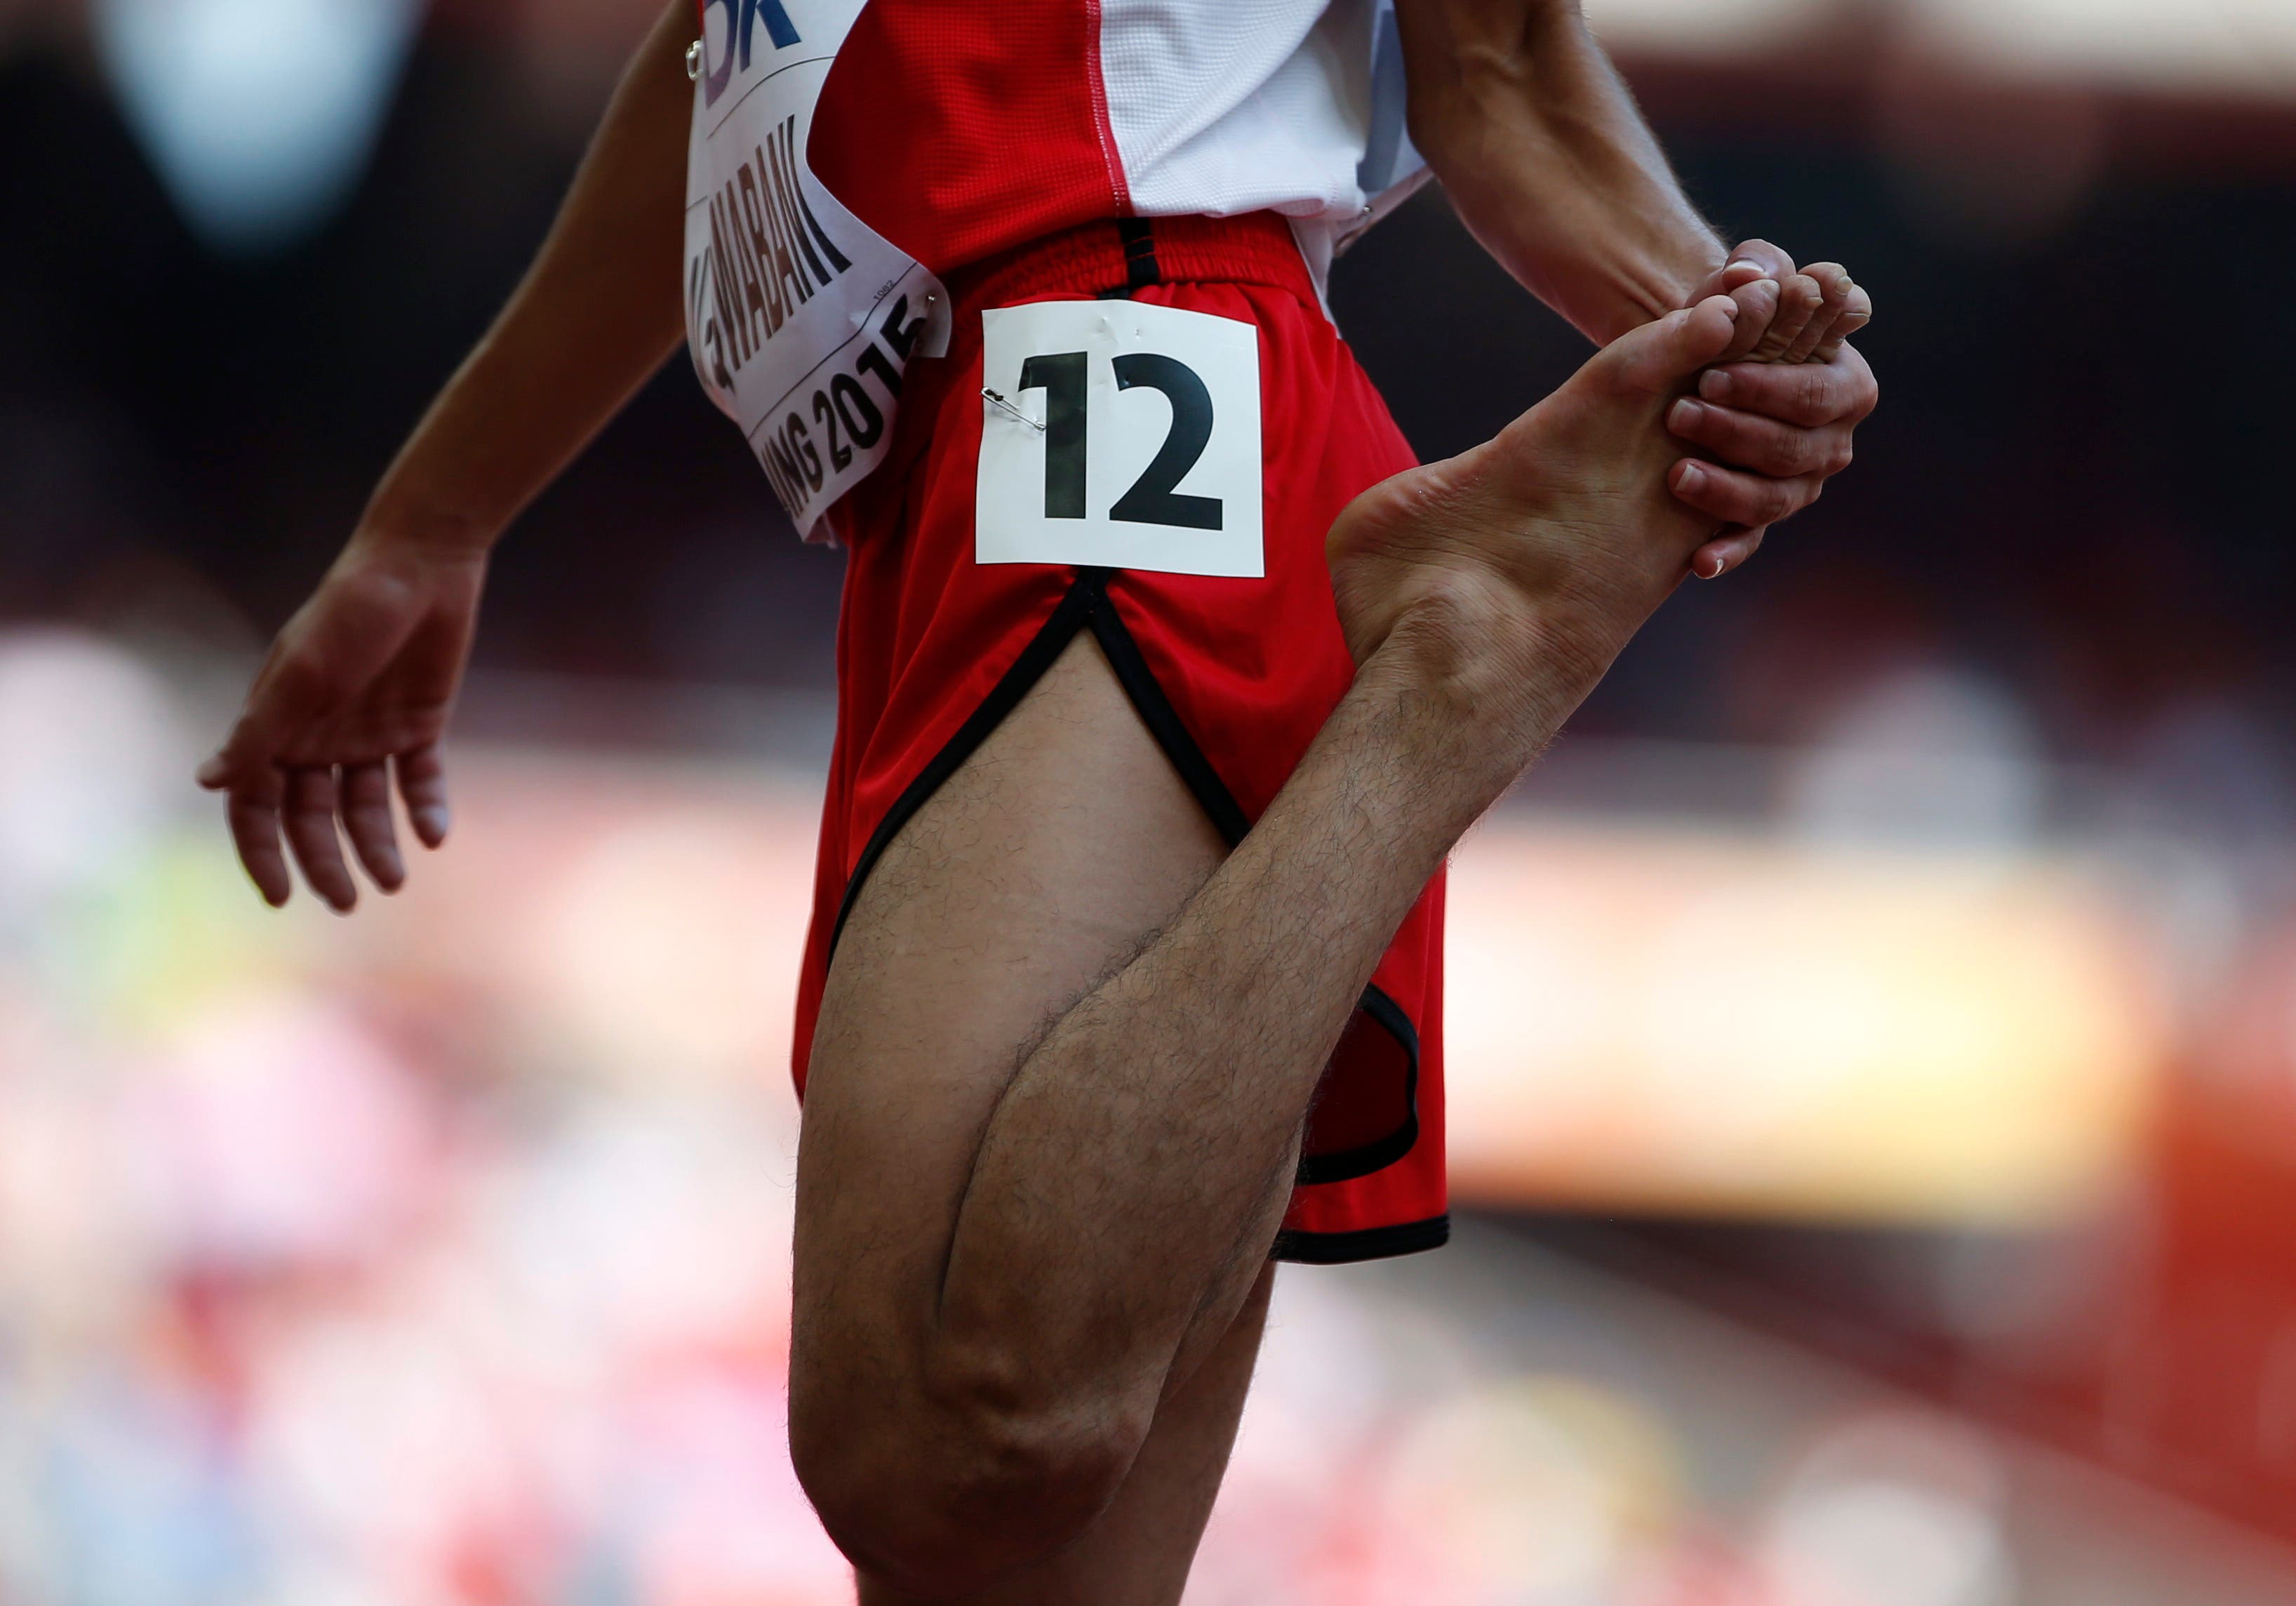 Abdullah Al-Qwabani of Yemen, who competed barefoot, looks at his foot after his men's 5000 metres heat at the IAAF World Championships at the National Stadium in Beijing, China August 26, 2015.  (Reuters)